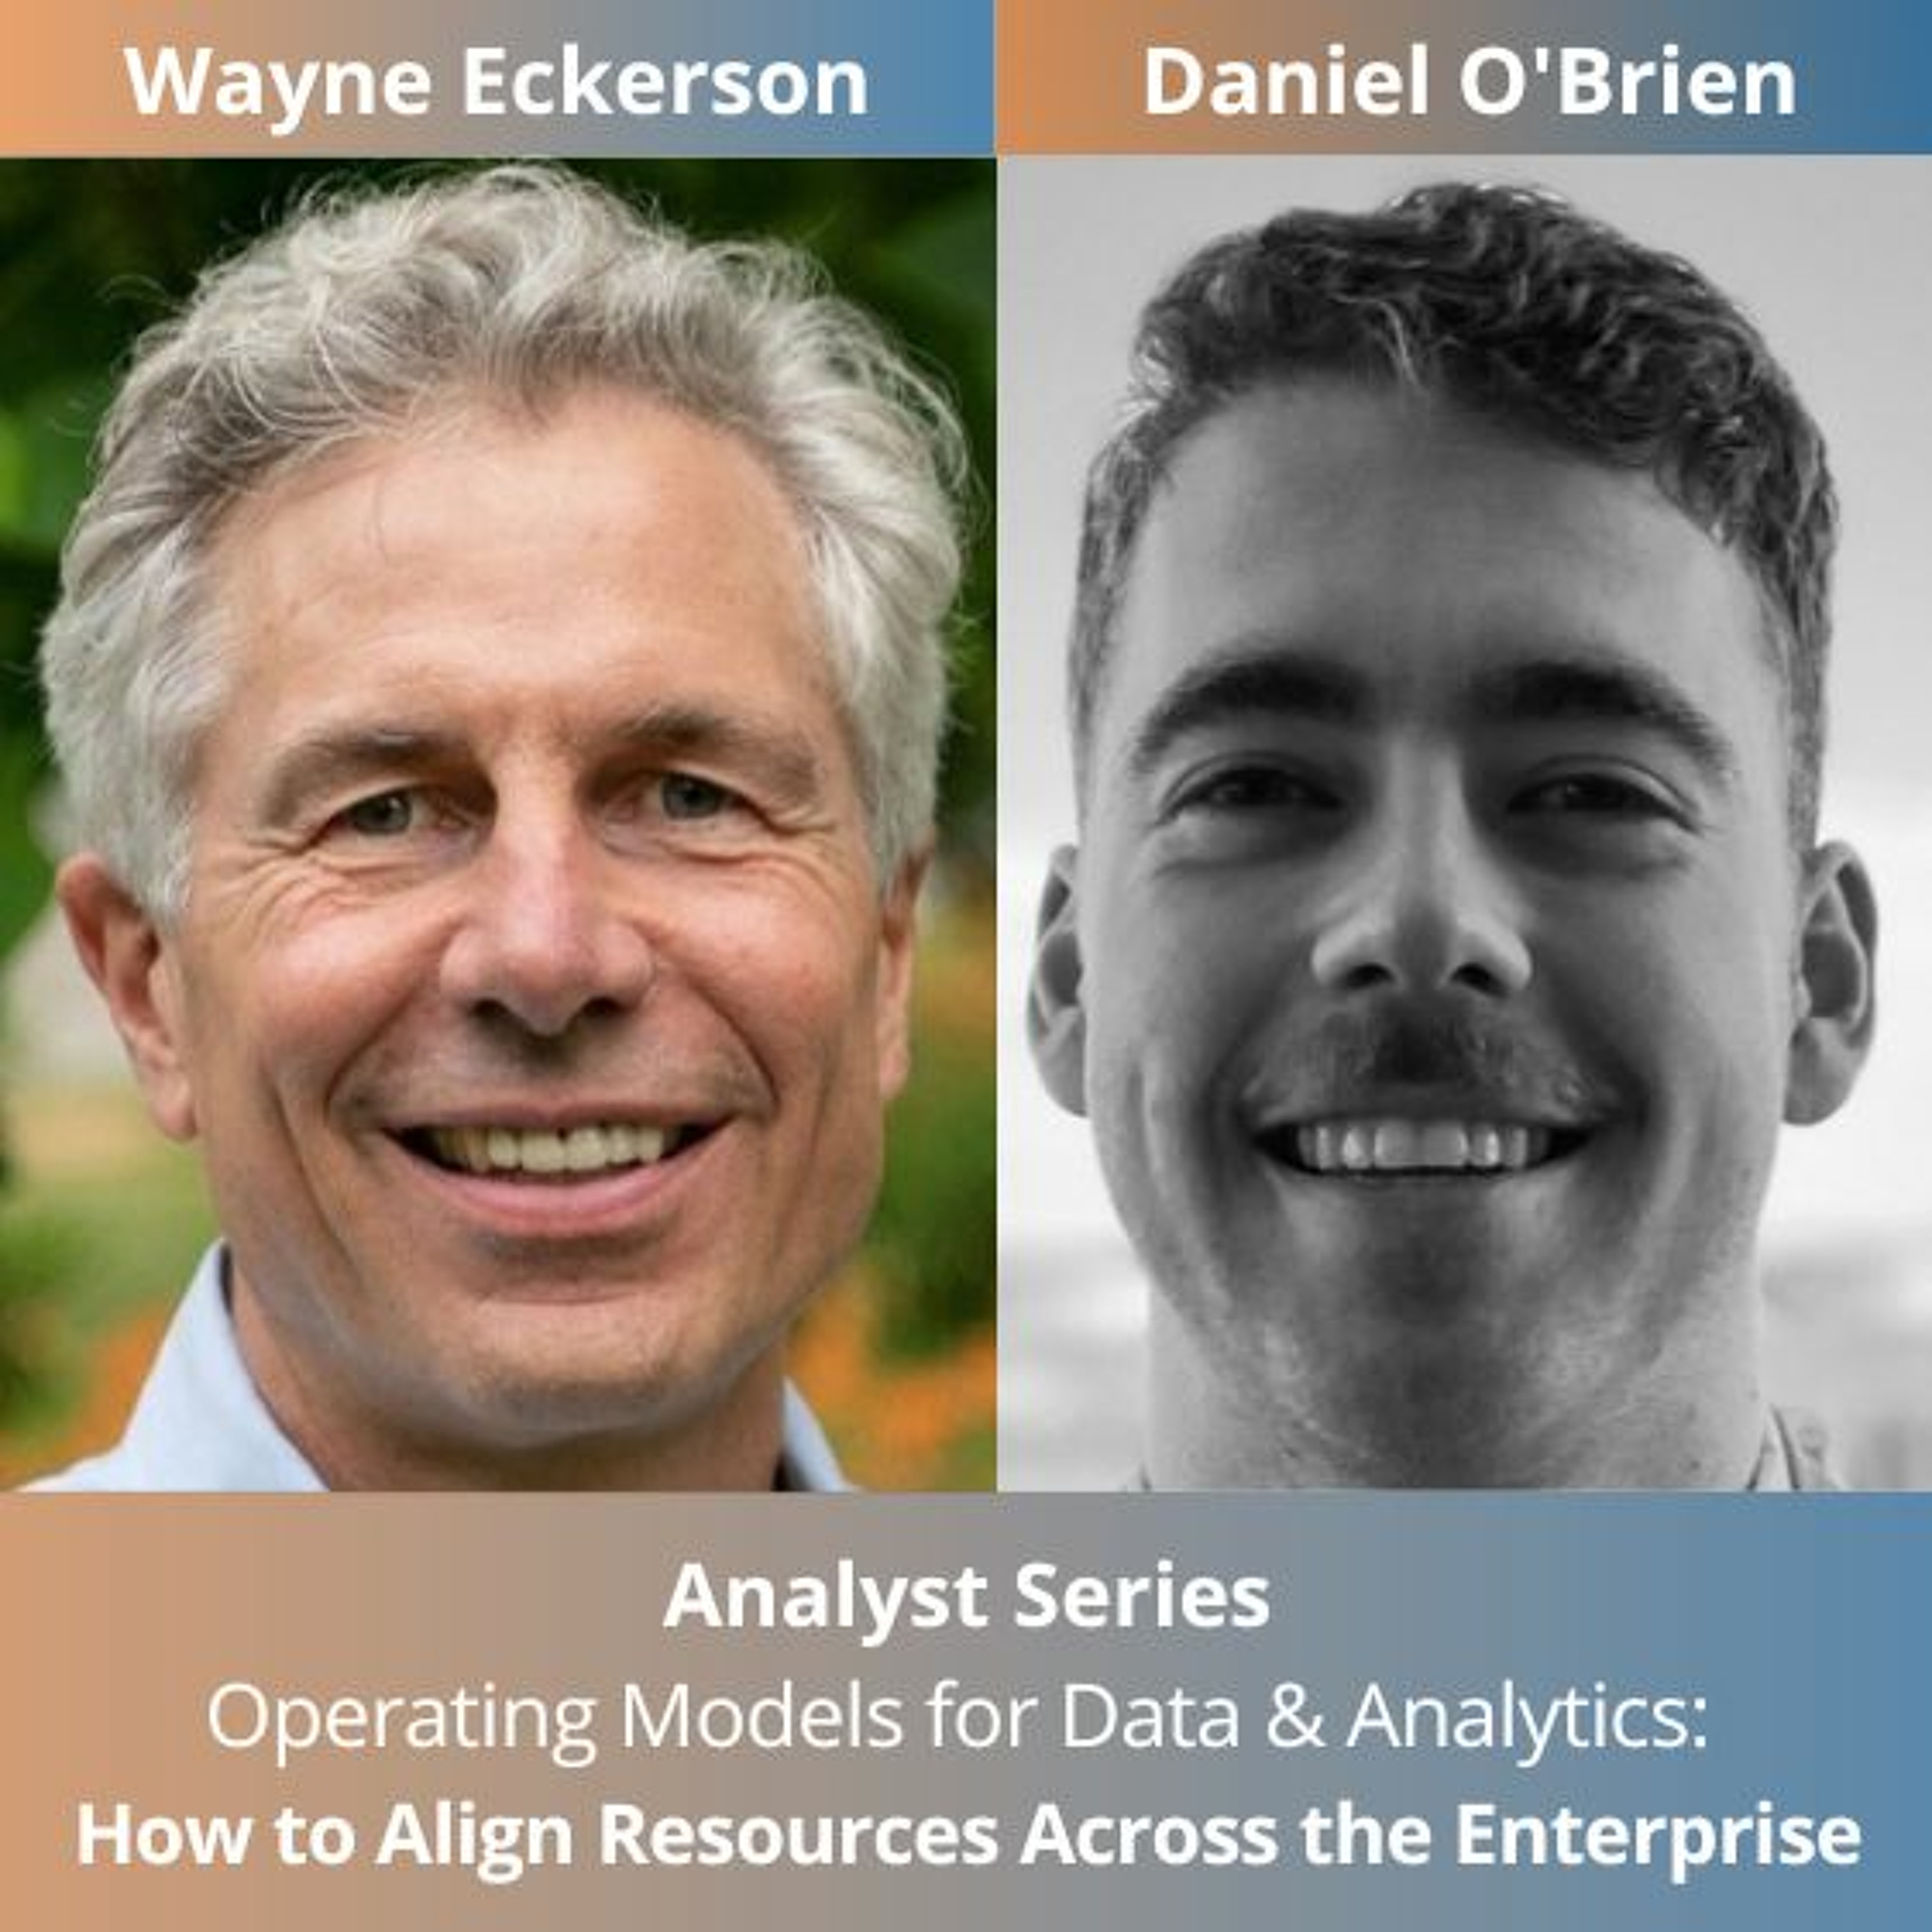 Analyst Series - Operating Models for Data & Analytics: How to Align Resources Across the Enterprise